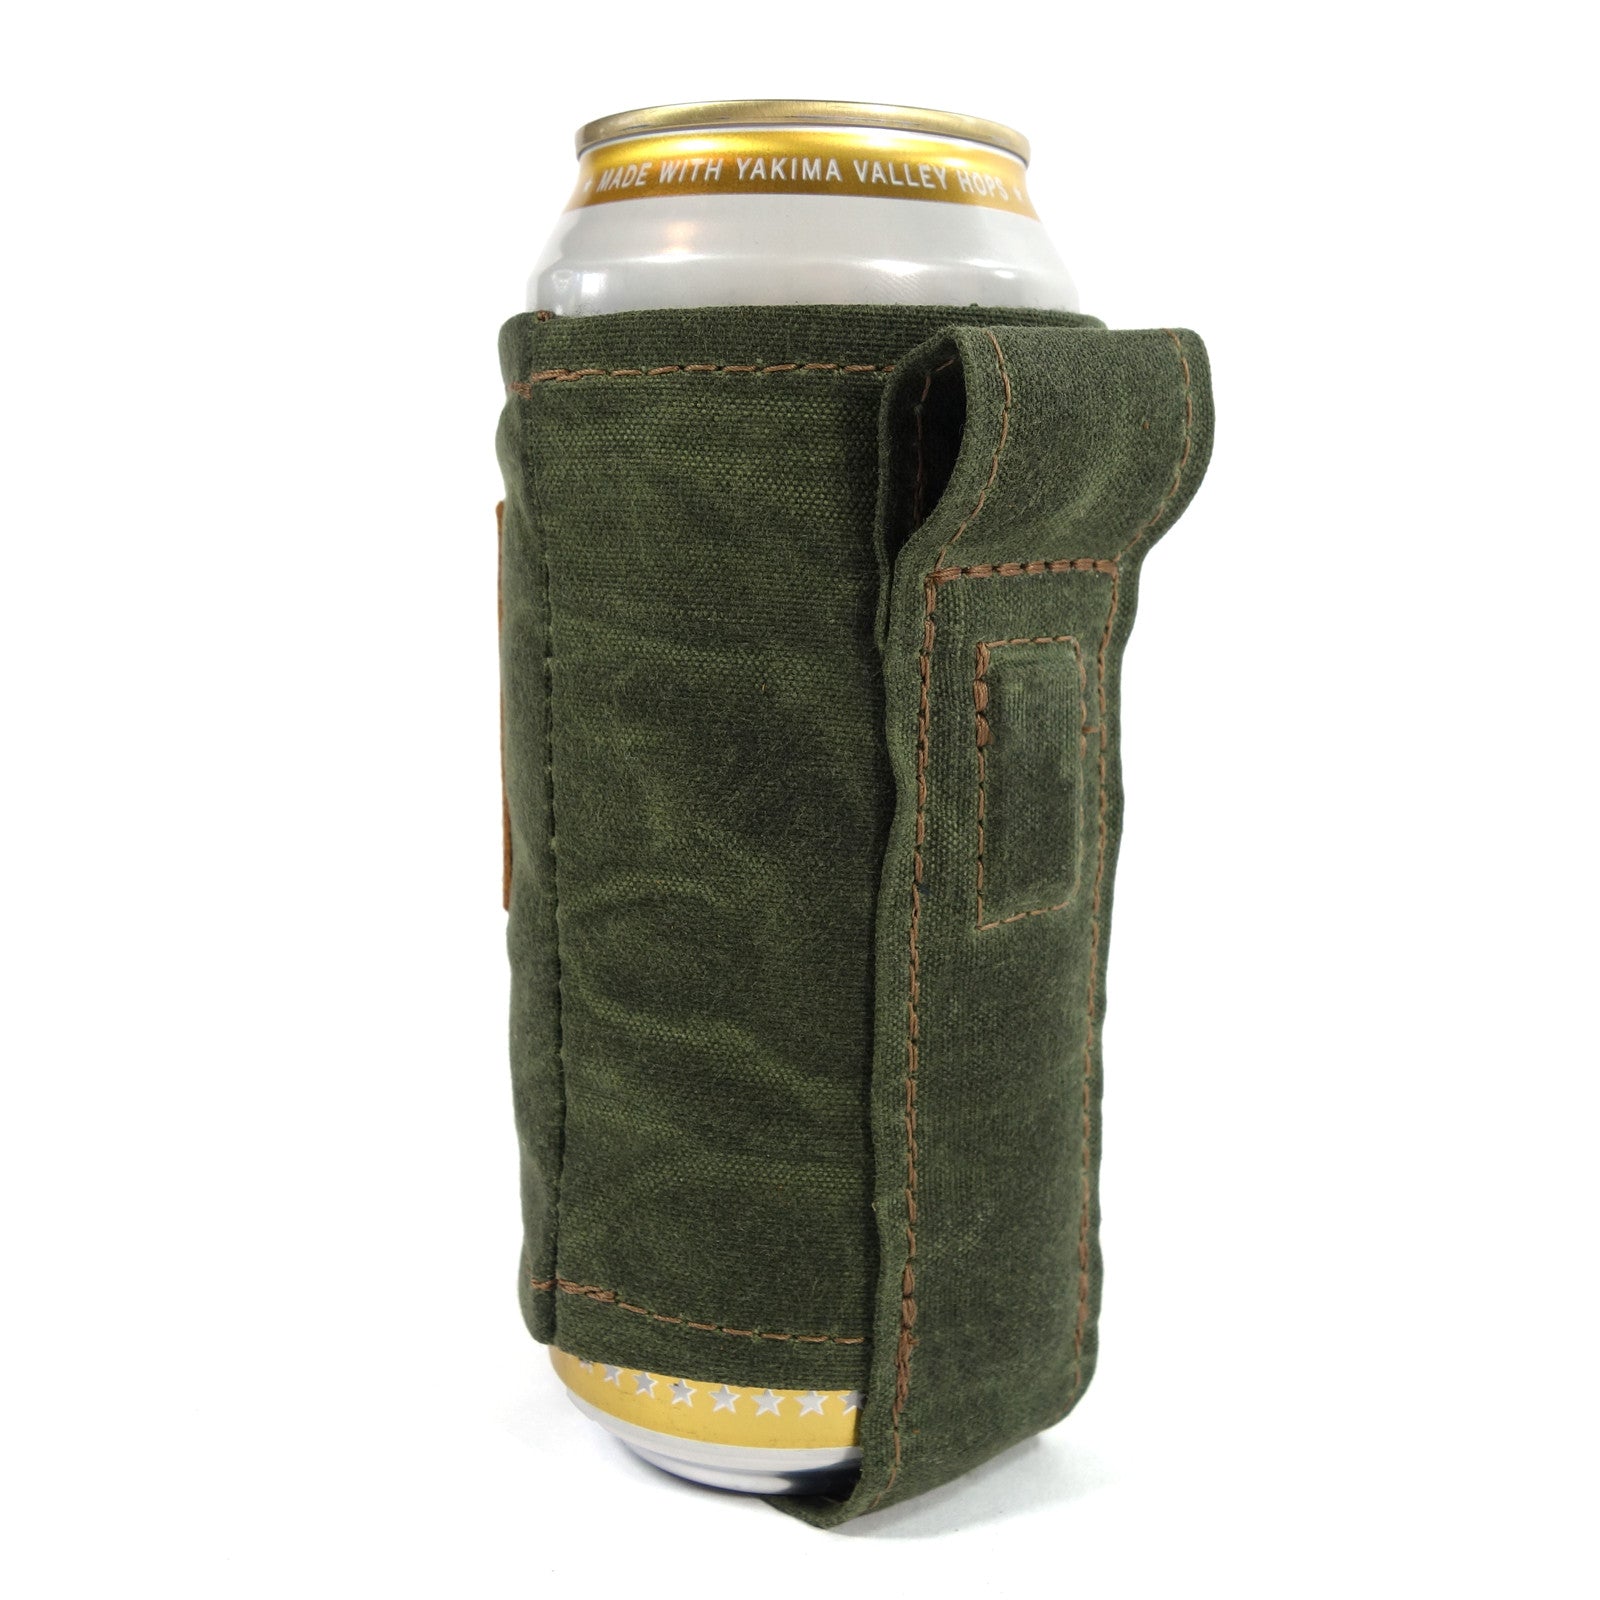 Magnetic Koozie, waxed canvas koozie, leather koozie, rare earth magnets, beer koozie, tallboy koozie, red clouds koozie, This is not your normal koozie. It uses very strong, rare earth magnets to hold the weight of your full beverage attached to the fridge, stove, your car or any other metal surface while you are working or playing. A clever back loop also lets you attach a string and wear the koozie around your neck.